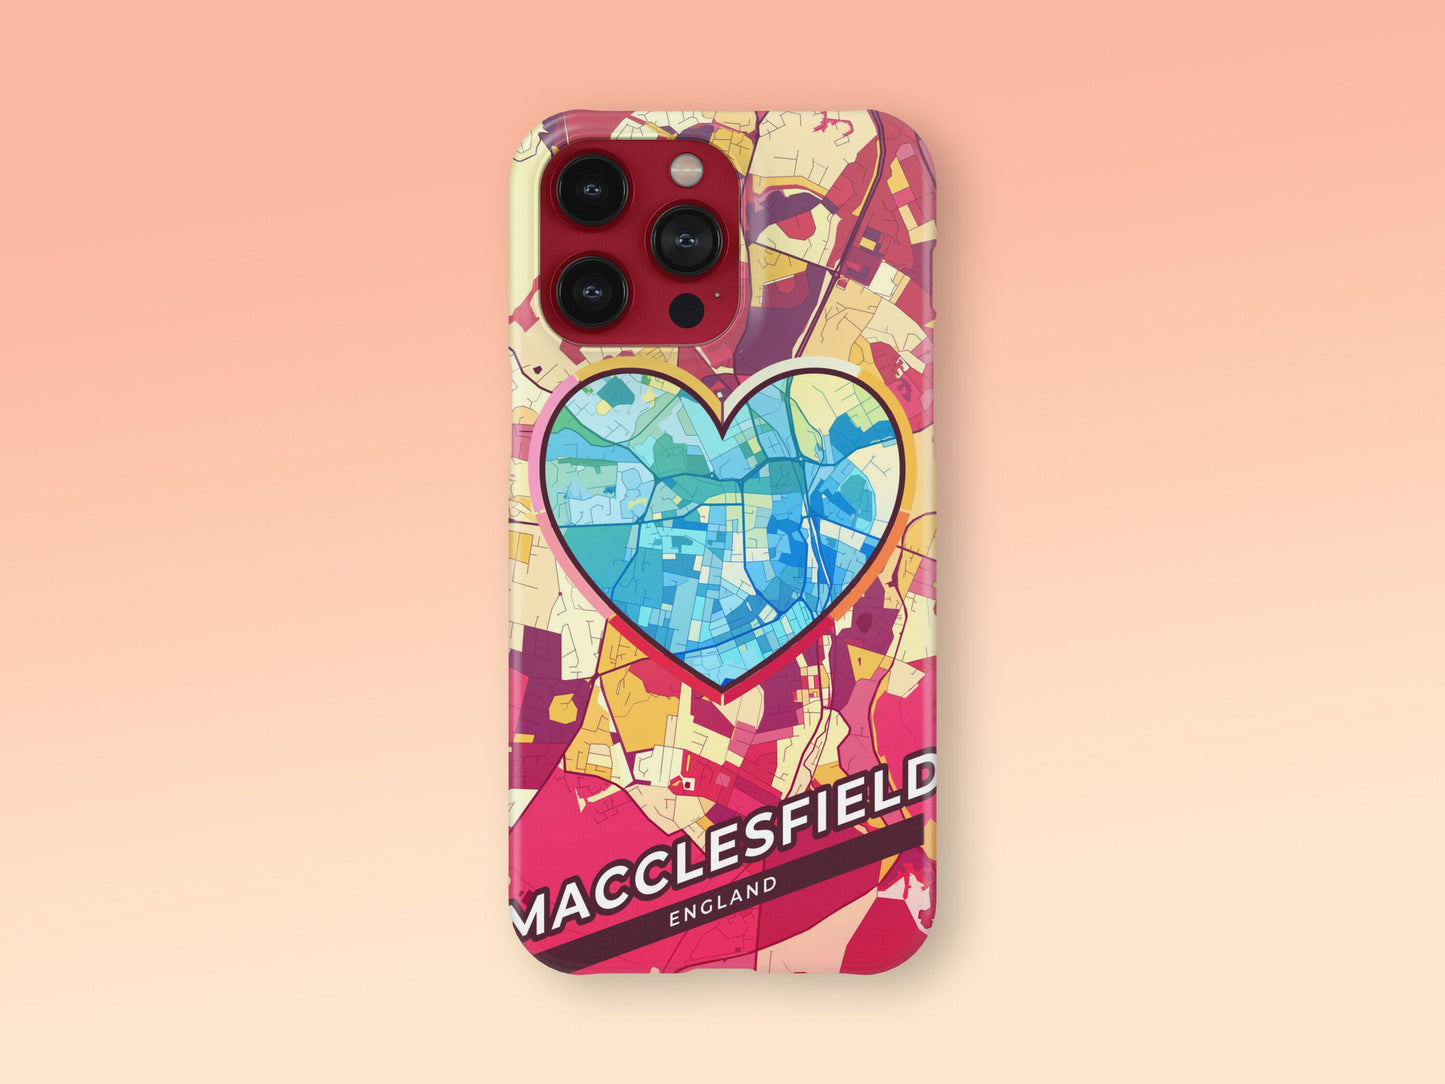 Macclesfield England slim phone case with colorful icon. Birthday, wedding or housewarming gift. Couple match cases. 2